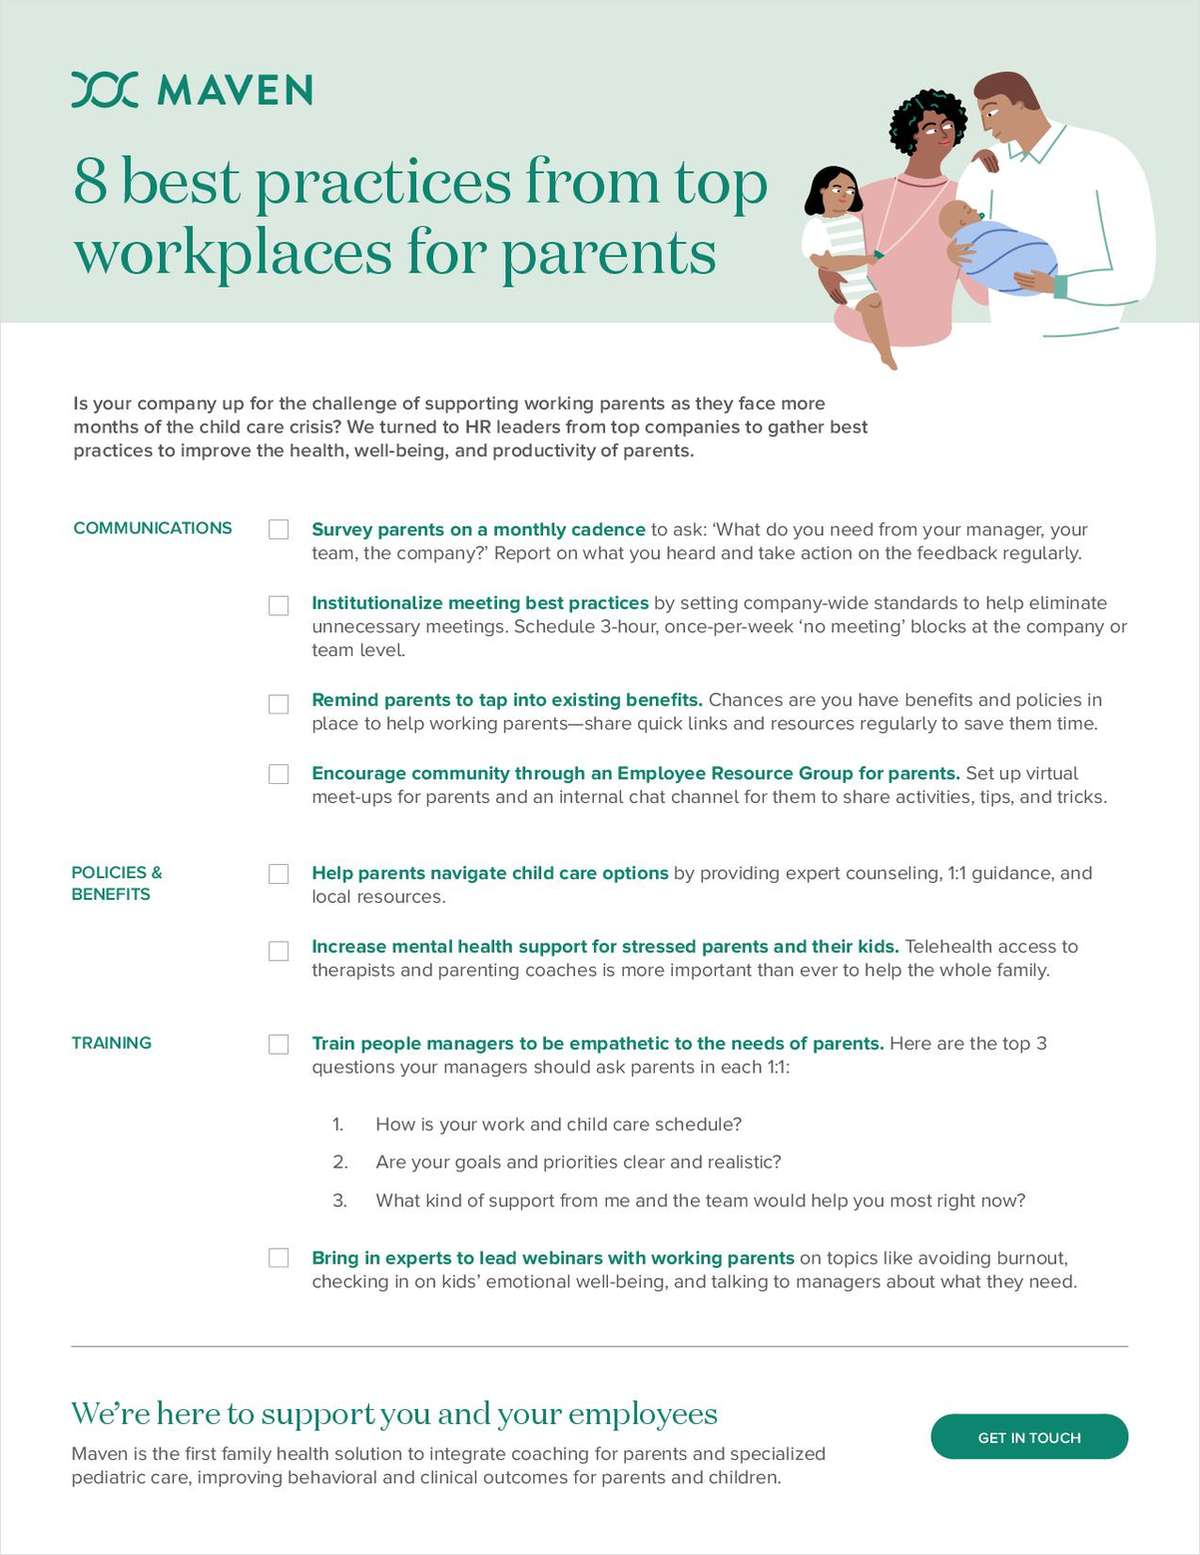 8 Best Practices from Top Workplaces for Parents